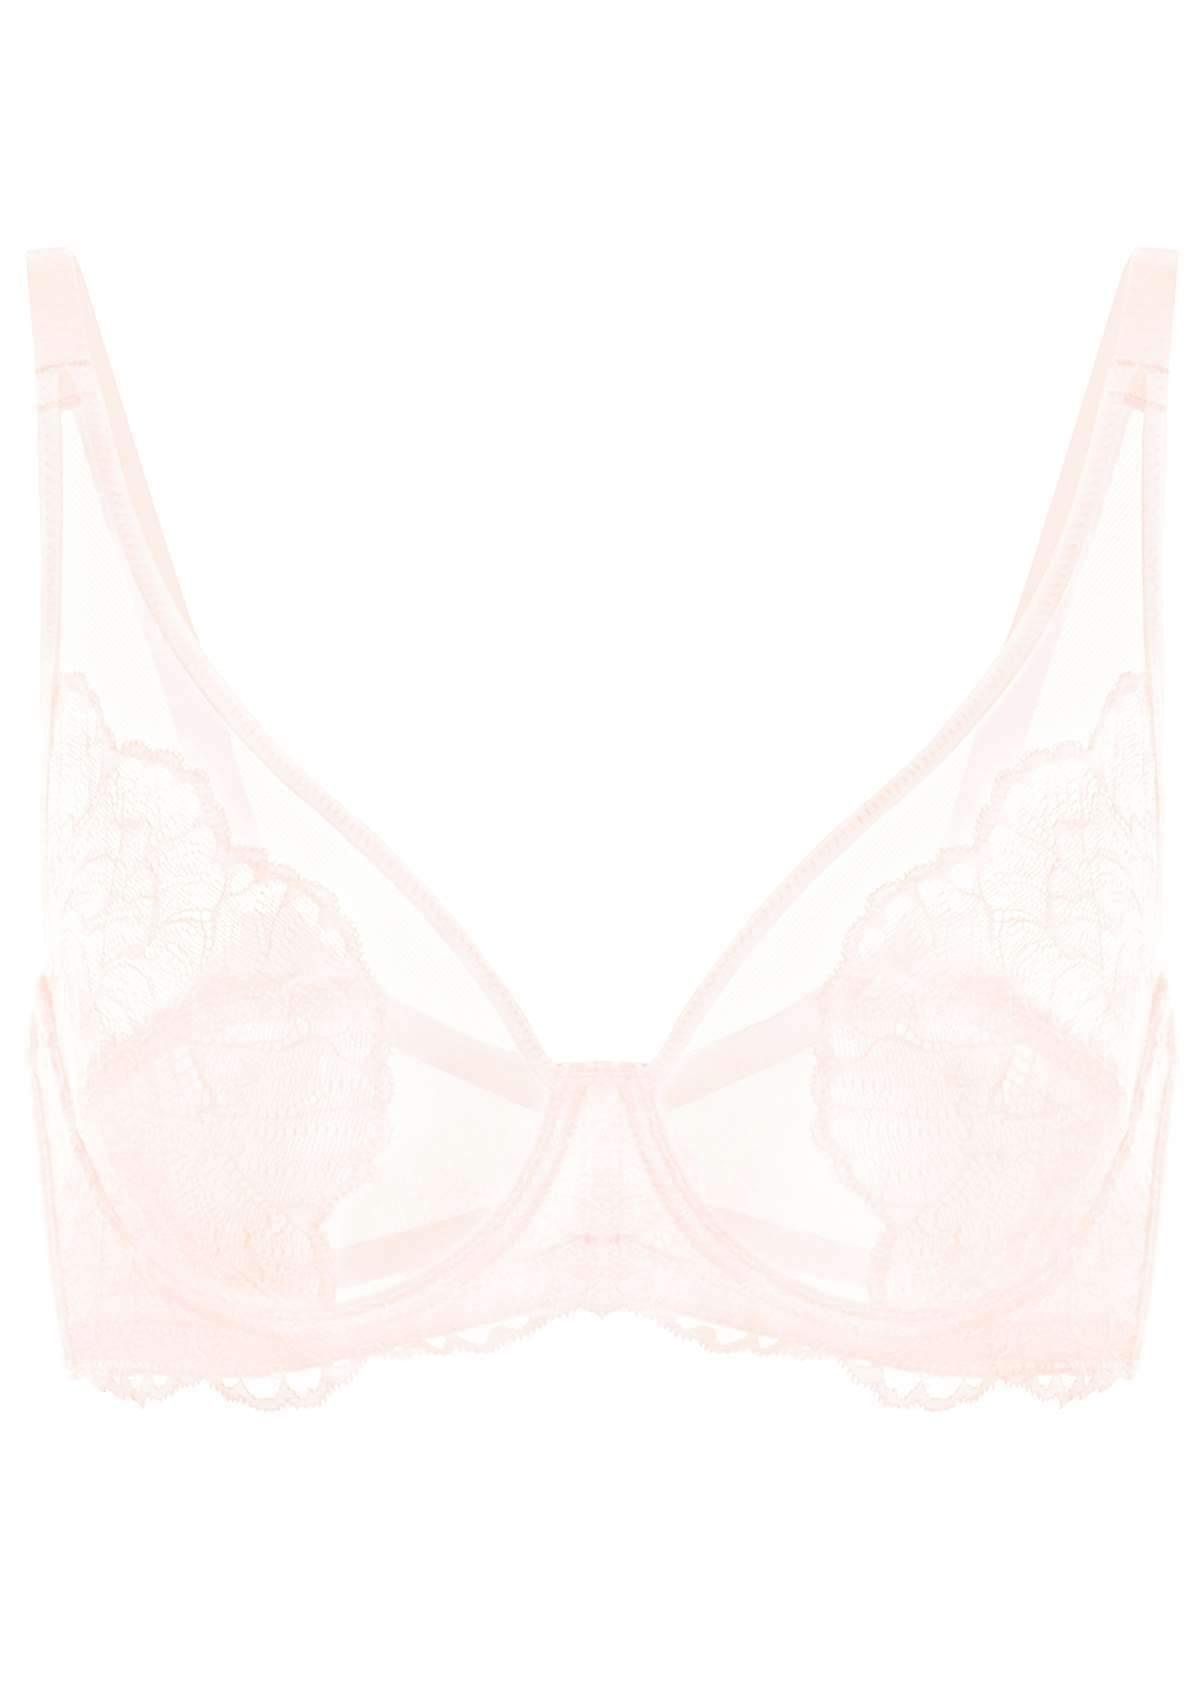 HSIA Blossom Sheer Lace Bra: Comfortable Underwire Bra For Big Busts - Dusty Peach / 36 / D